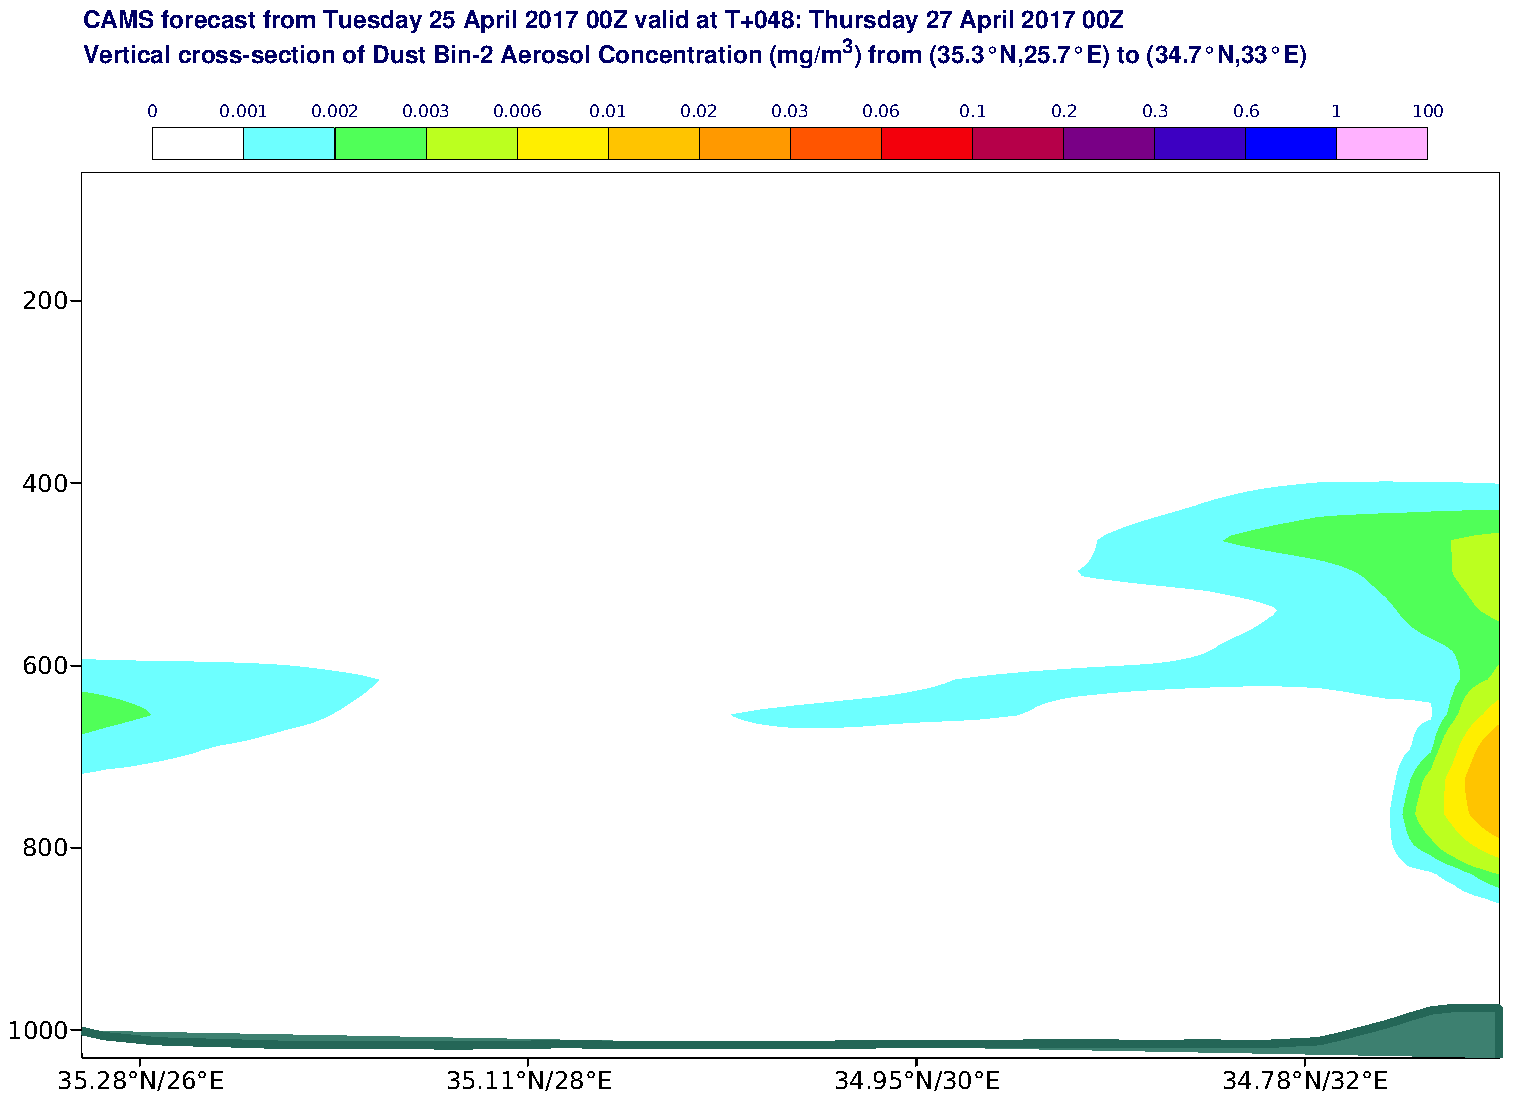 Vertical cross-section of Dust Bin-2 Aerosol Concentration (mg/m3) valid at T48 - 2017-04-27 00:00